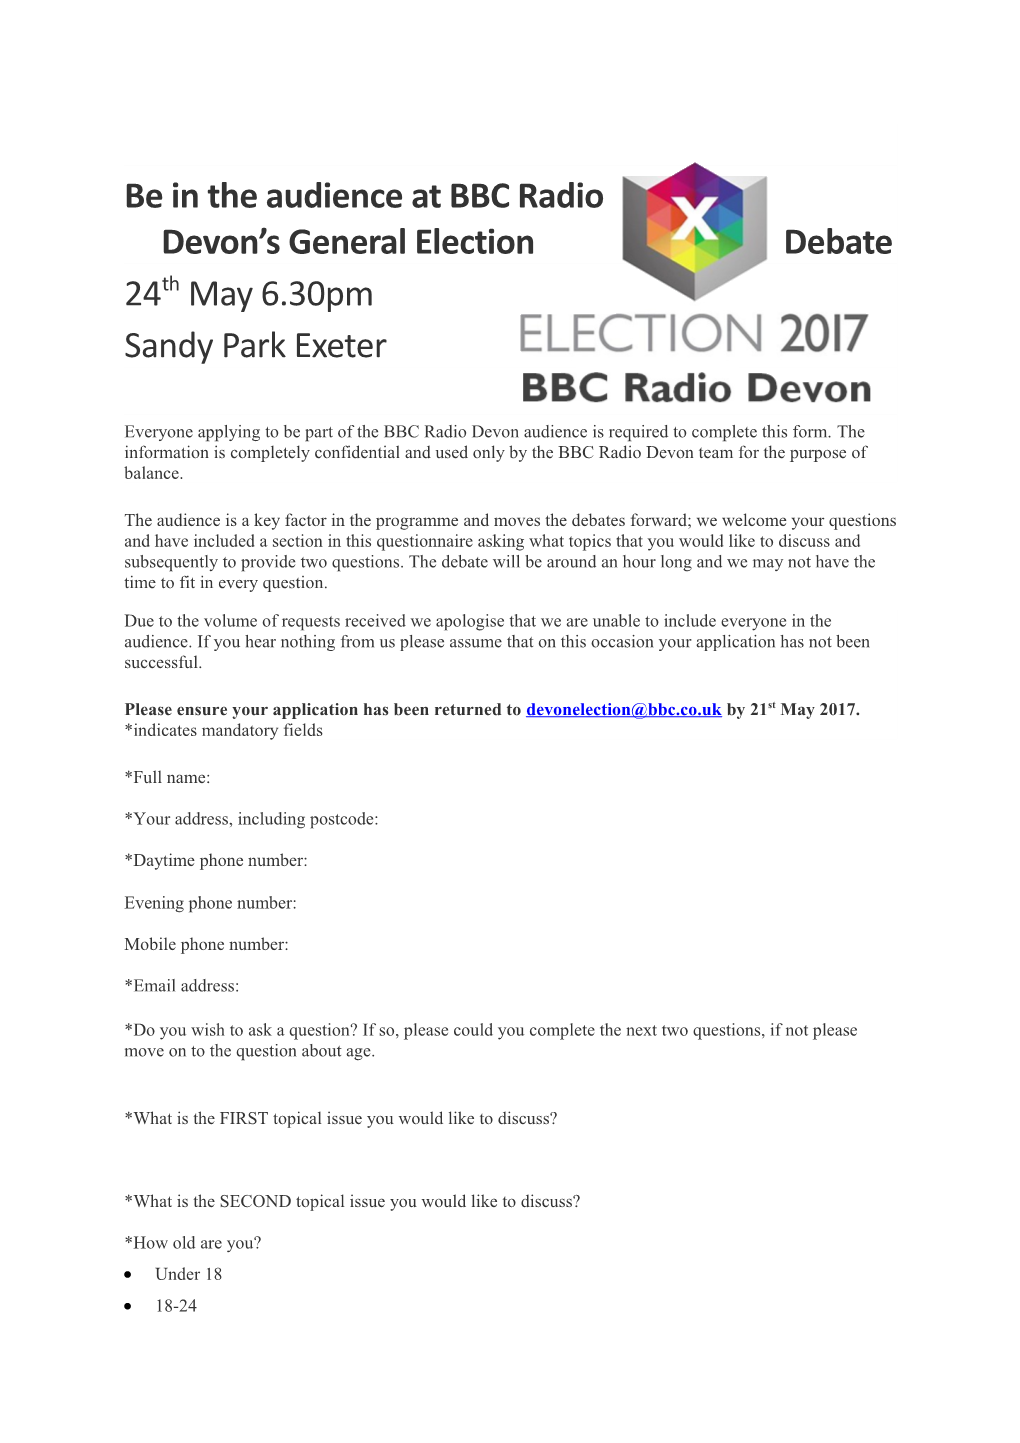 Be in the Audience at BBC Radio Devon S General Election Debate